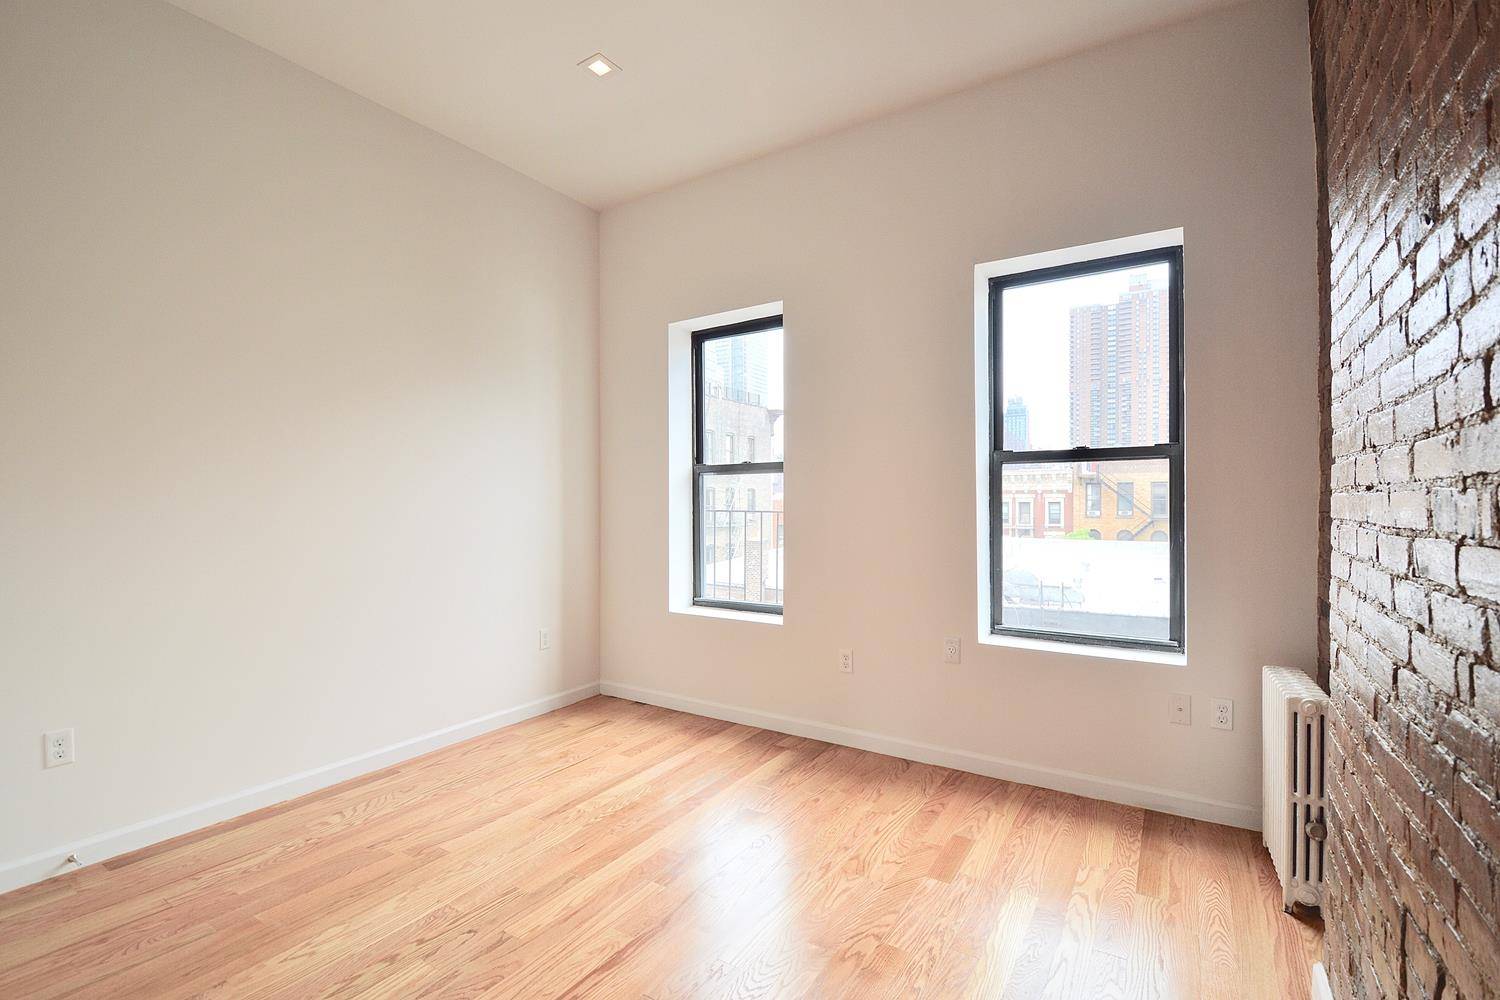 Stylish amp ; modern gut renovated 1 bedroom in prime Hell's Kitchen location.